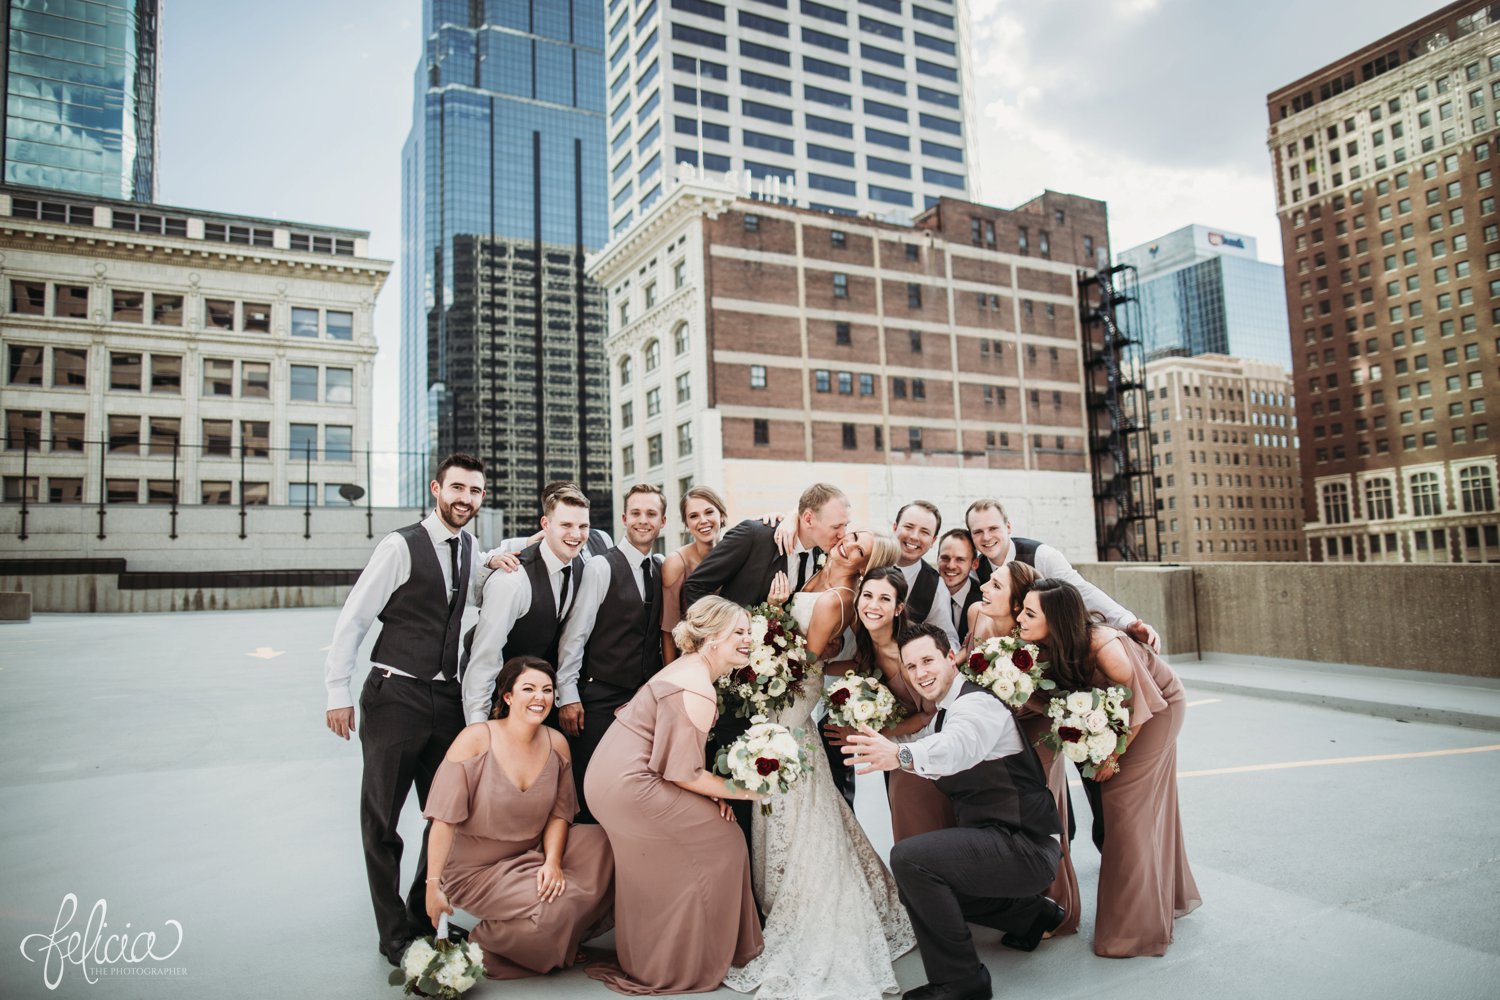 images by feliciathephotographer.com | destination wedding photographer | kansas city | best friends | laughter | natural light | mauve | light pink and red | bella bridesmaids | lace gown | fabulous frocks | full dramatic florals | wild hill | rooftop | urban | groomsmen | grey suit | tip top tux | 